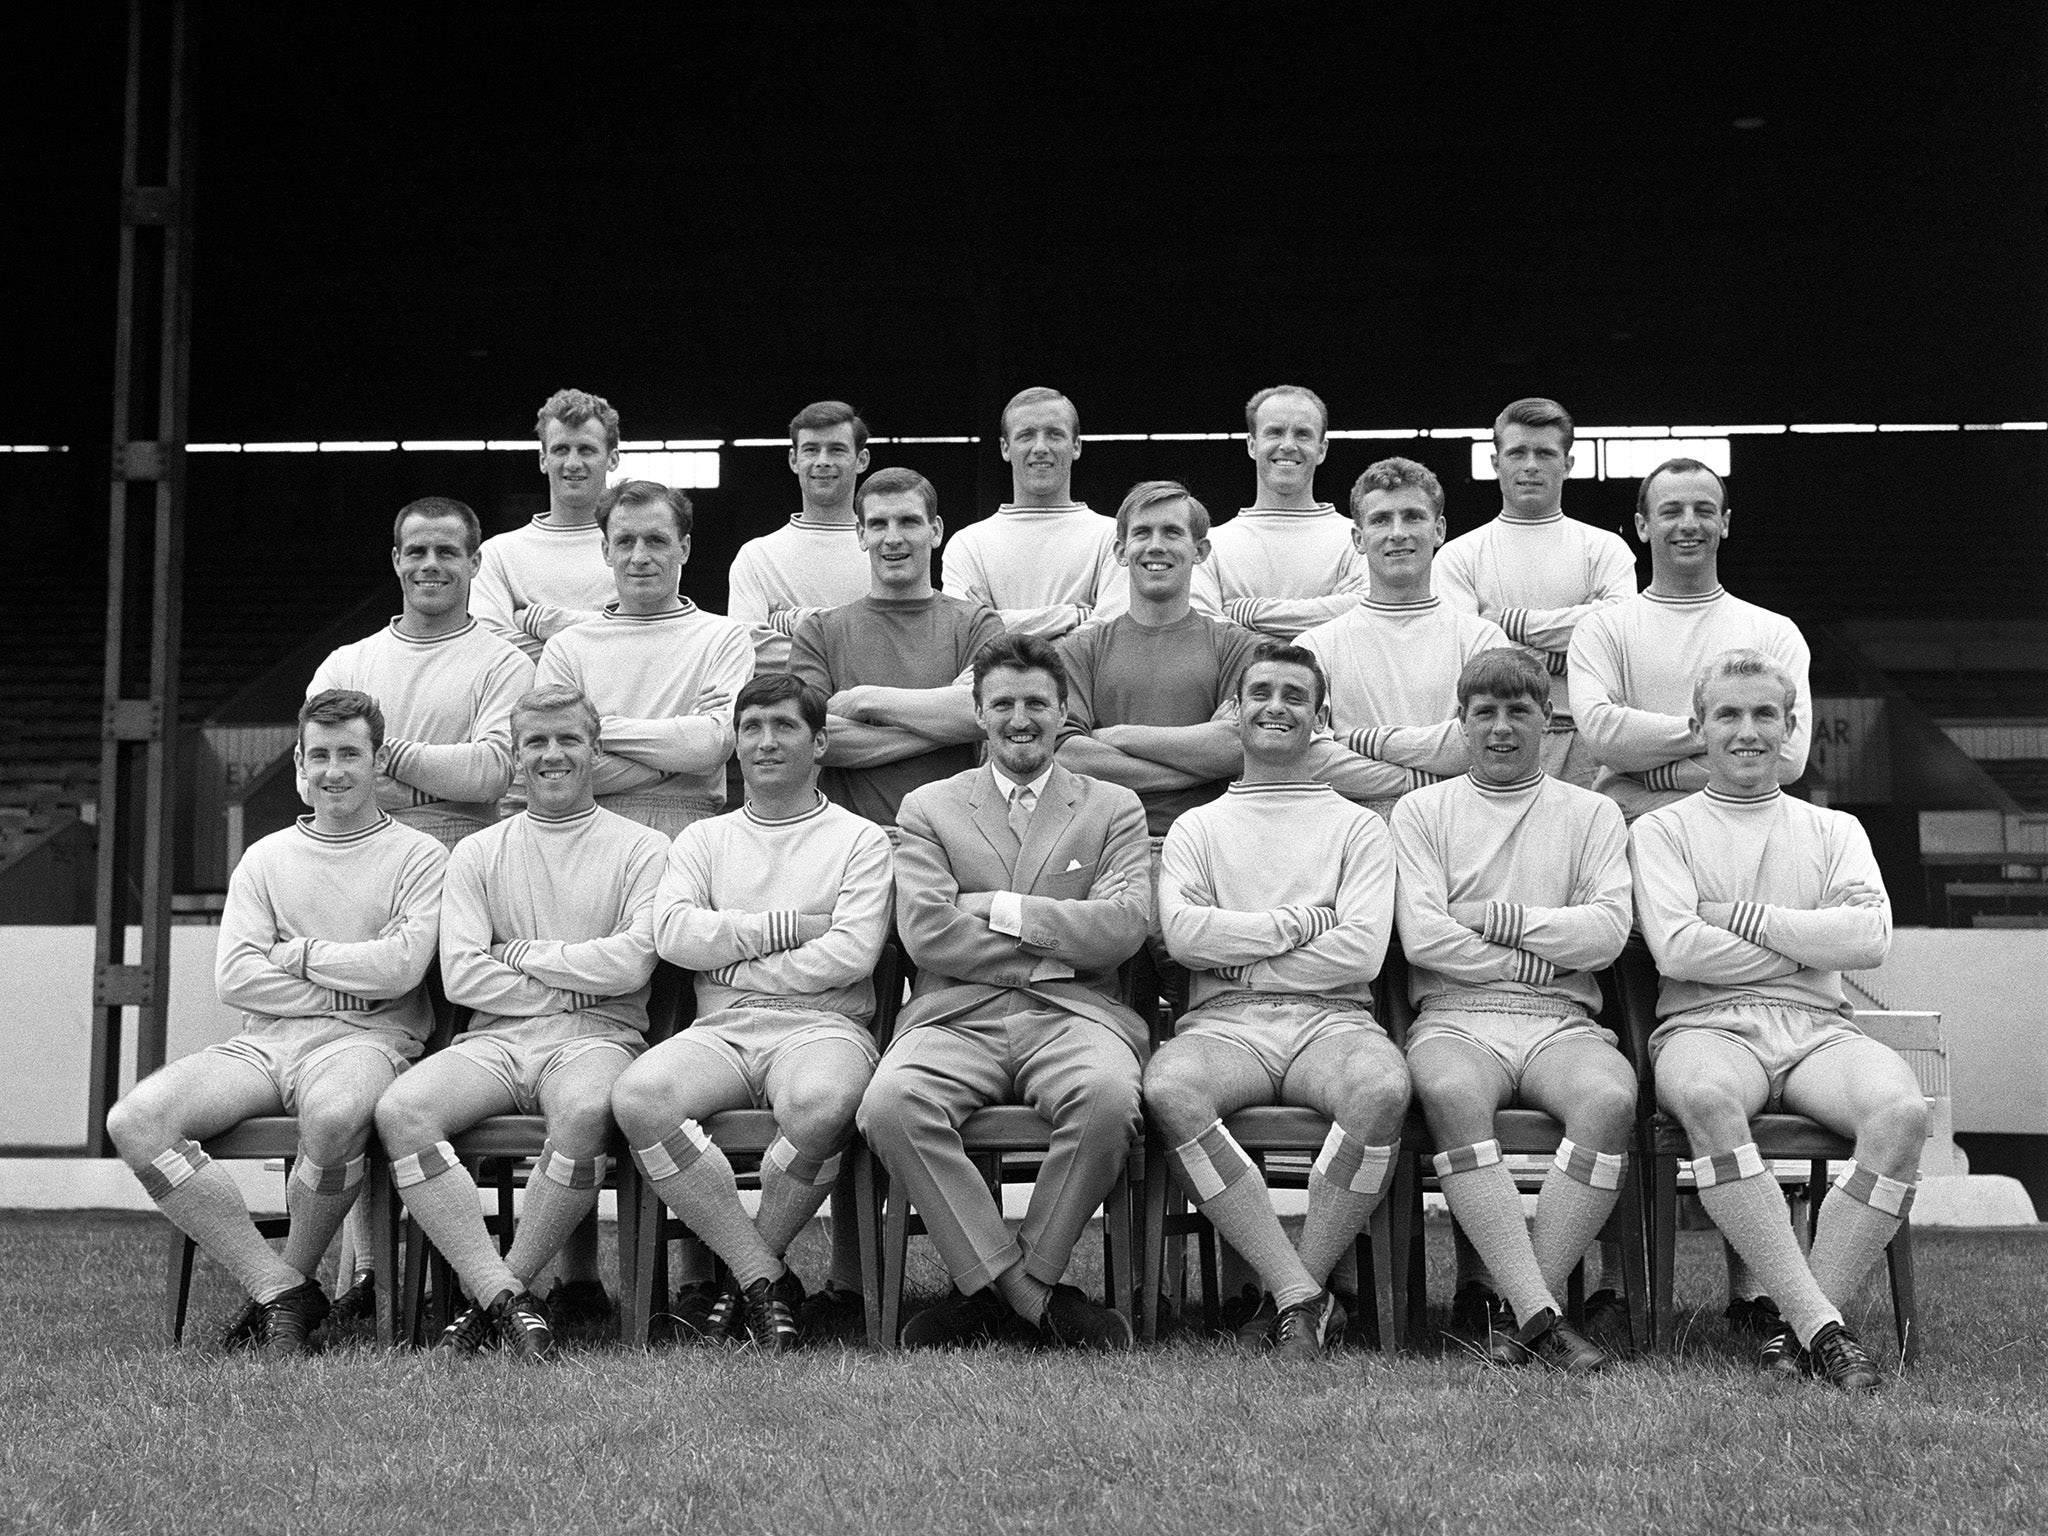 Coventry City Football Club, back row, left to right; Brian Hill, John Mitten, Alan Harris, Ron Farmer and Dietmar Bruck. Middle row; George Curtis, Kenneth Keyworth, Bob Wesson, Bill Glazier, Mick Kearns, and John Sillett. Front row; Ronald Rees, Ken Hal